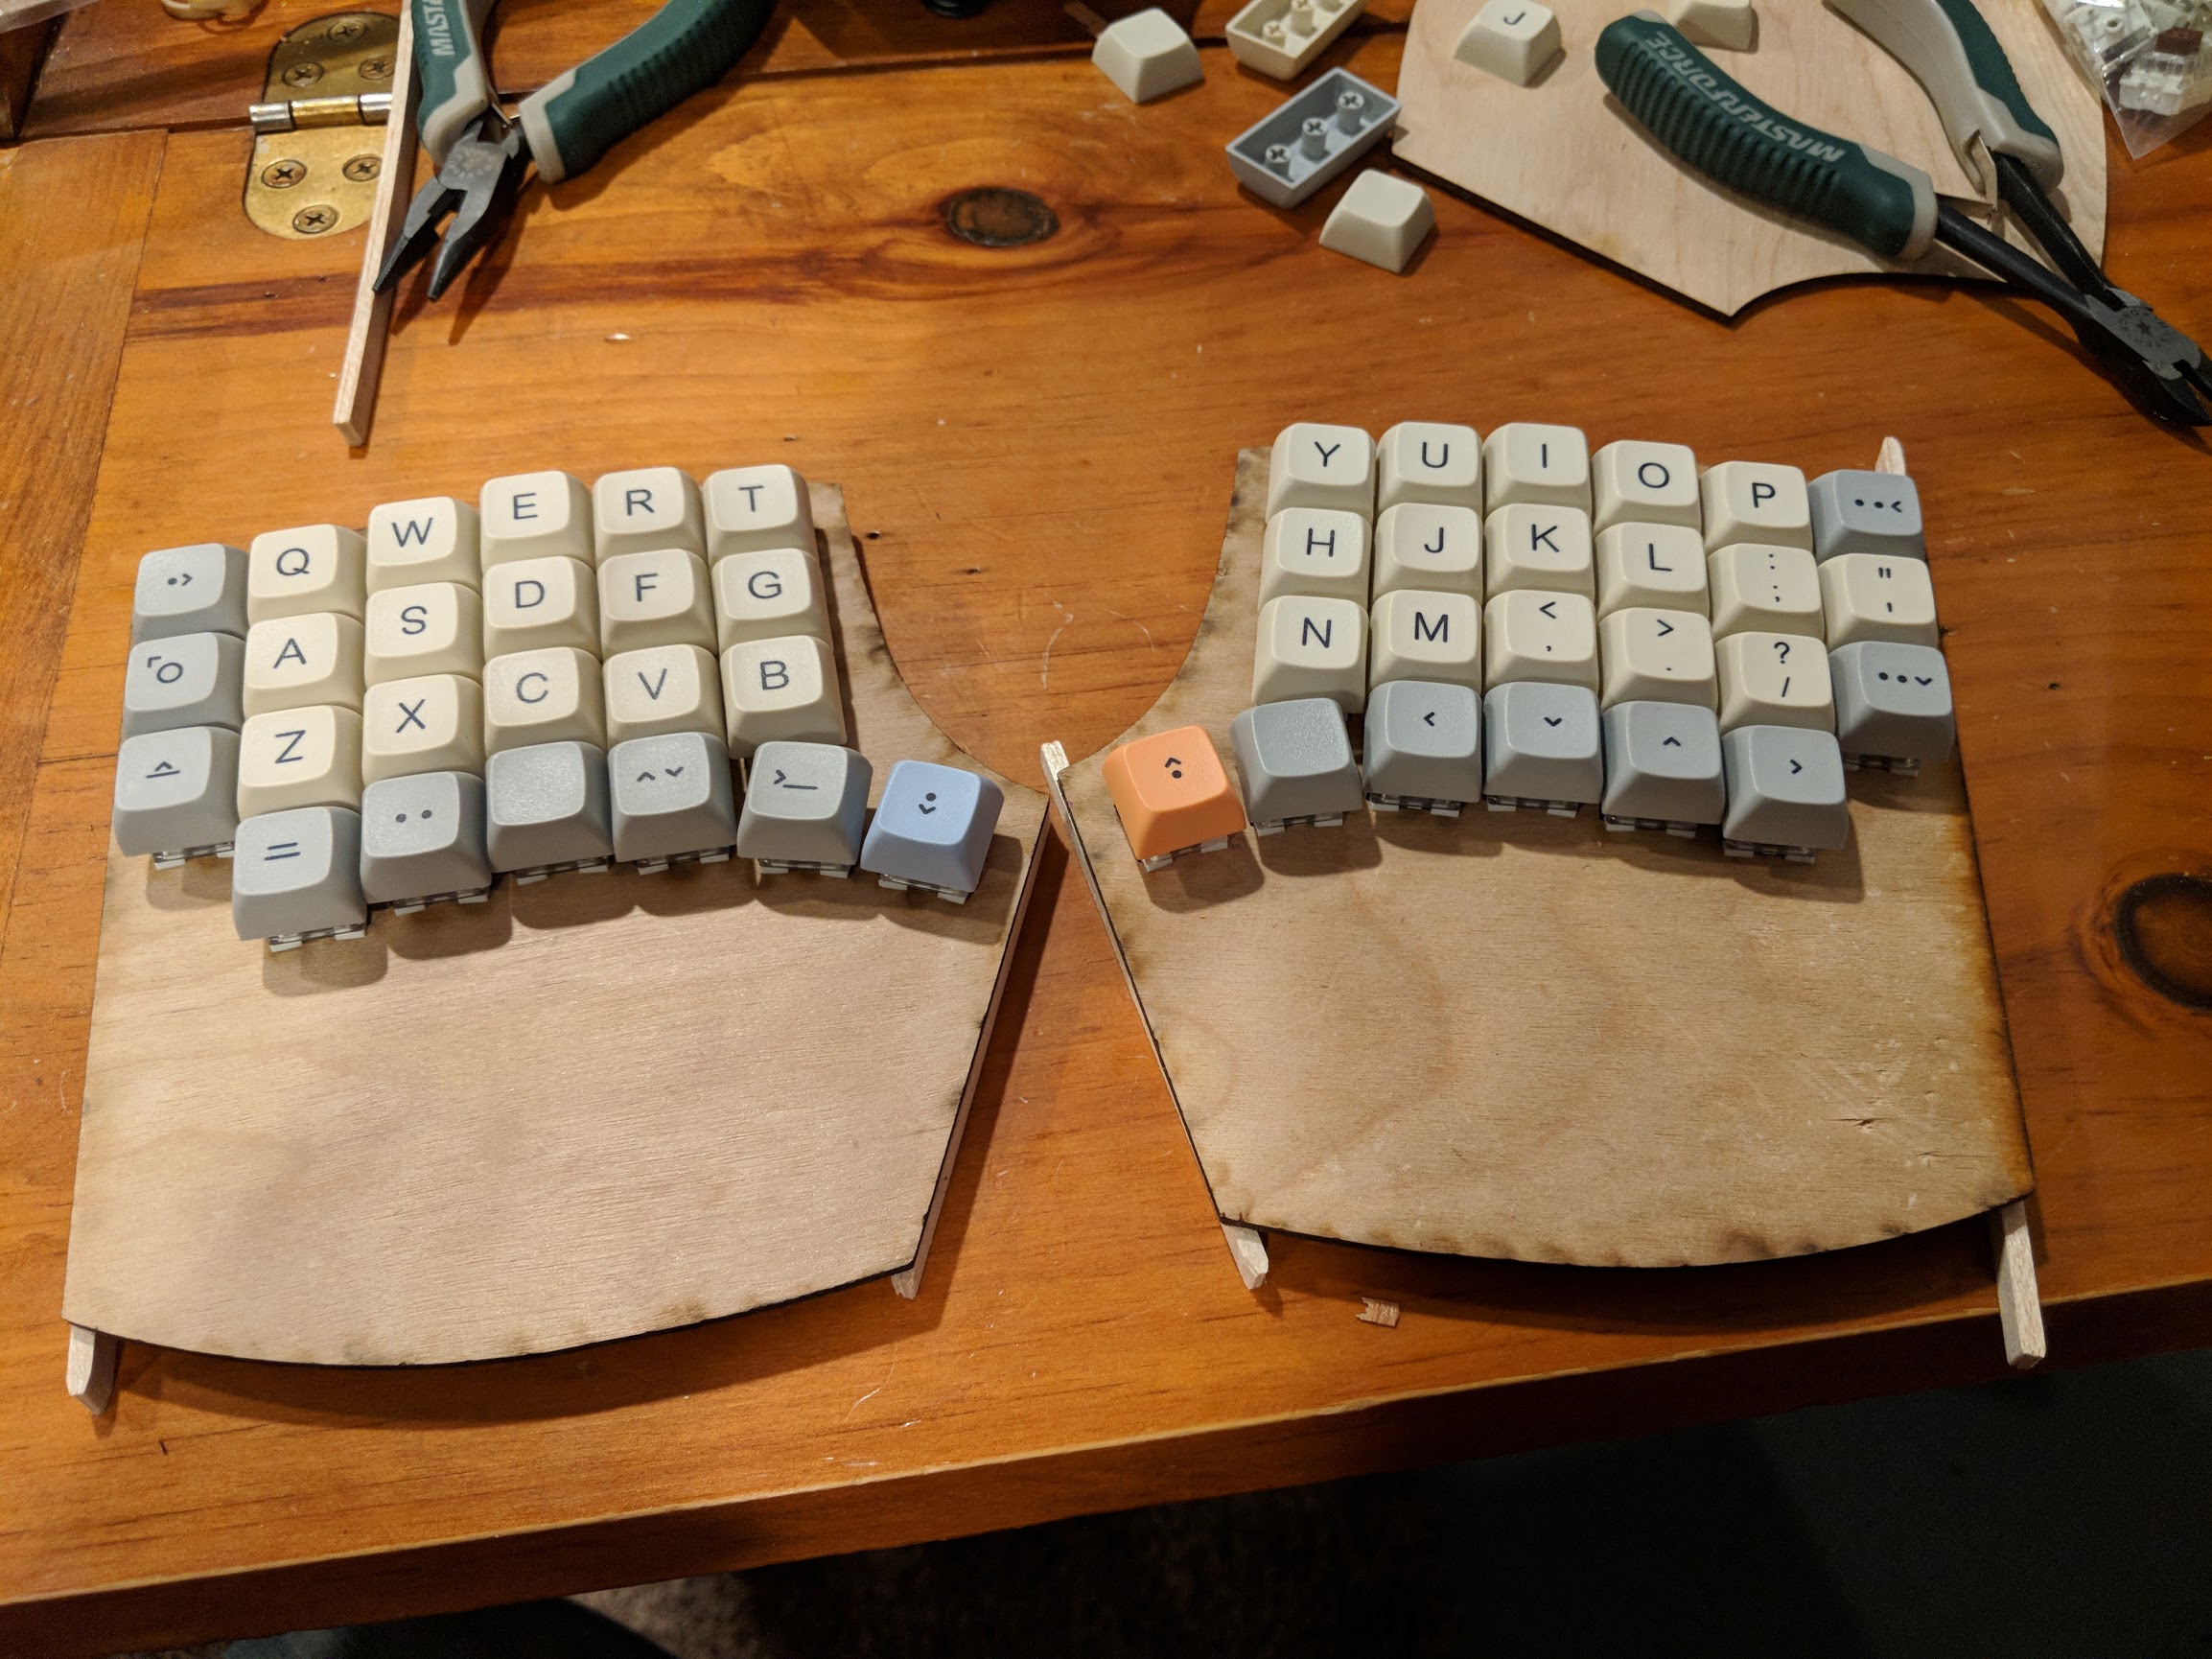 Wooden keyboard plates with keys so close together there are no gaps and you can't press the buttons